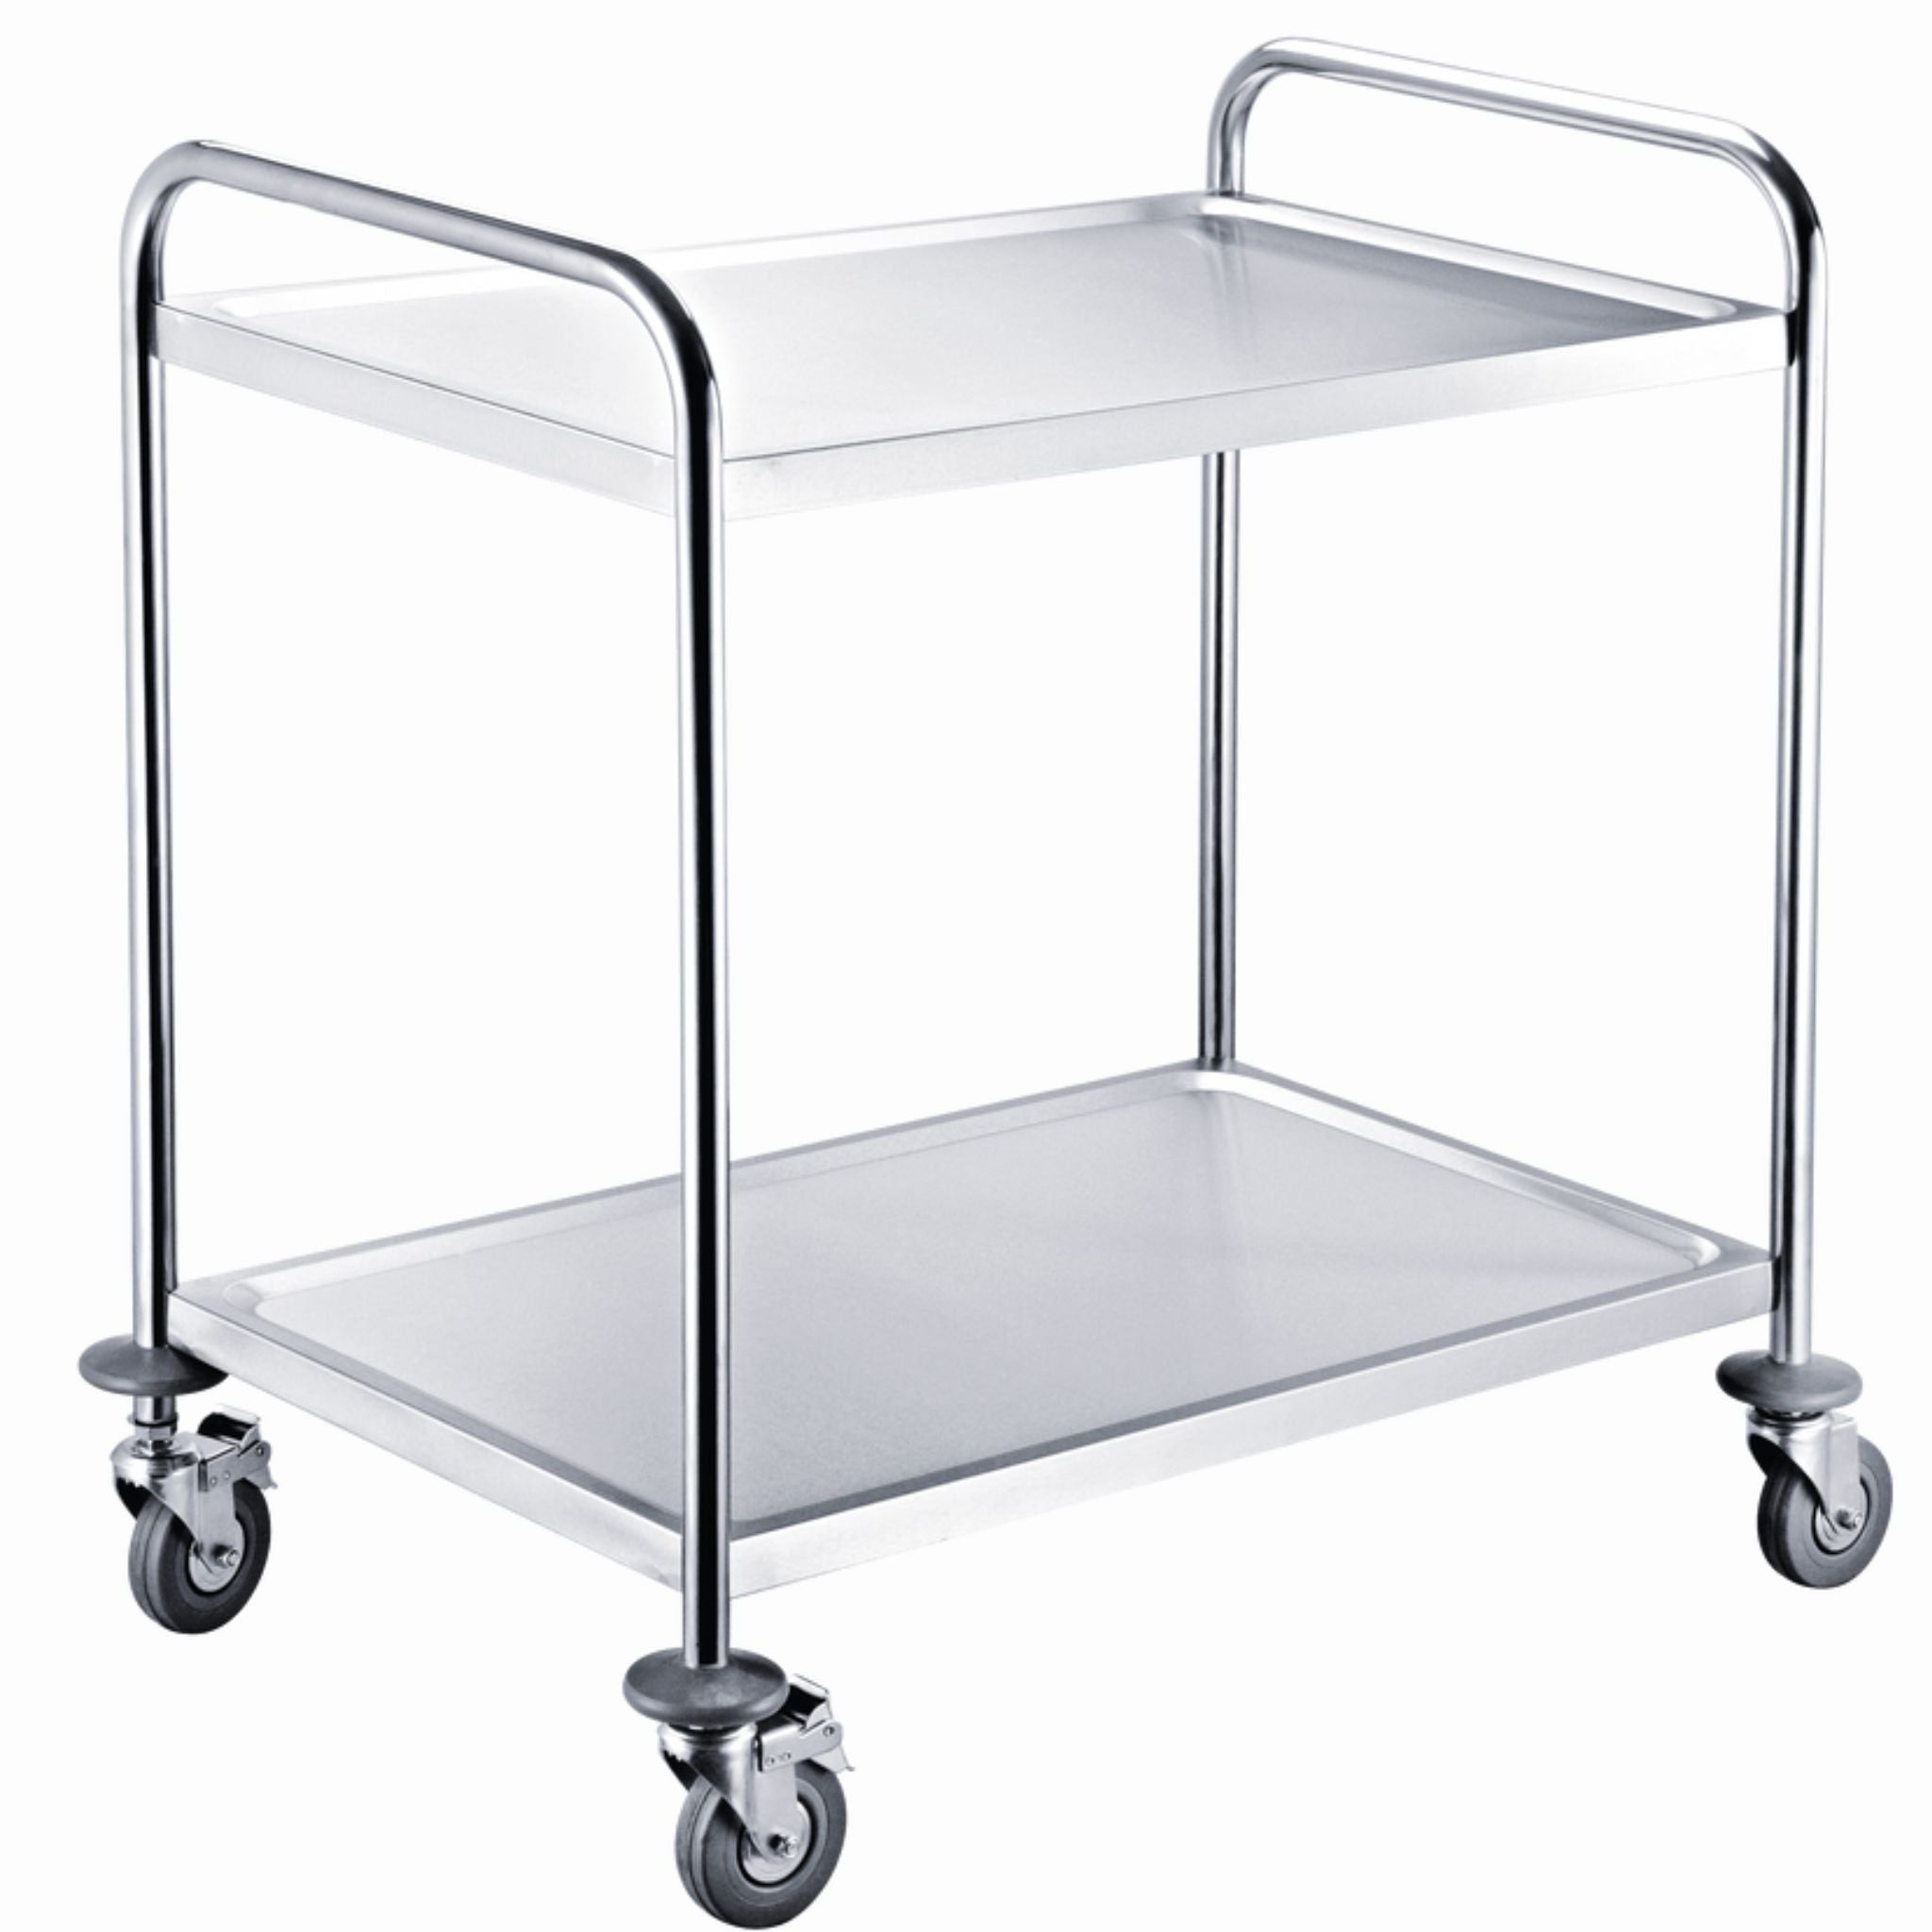 Stainless steel side trolley Basic